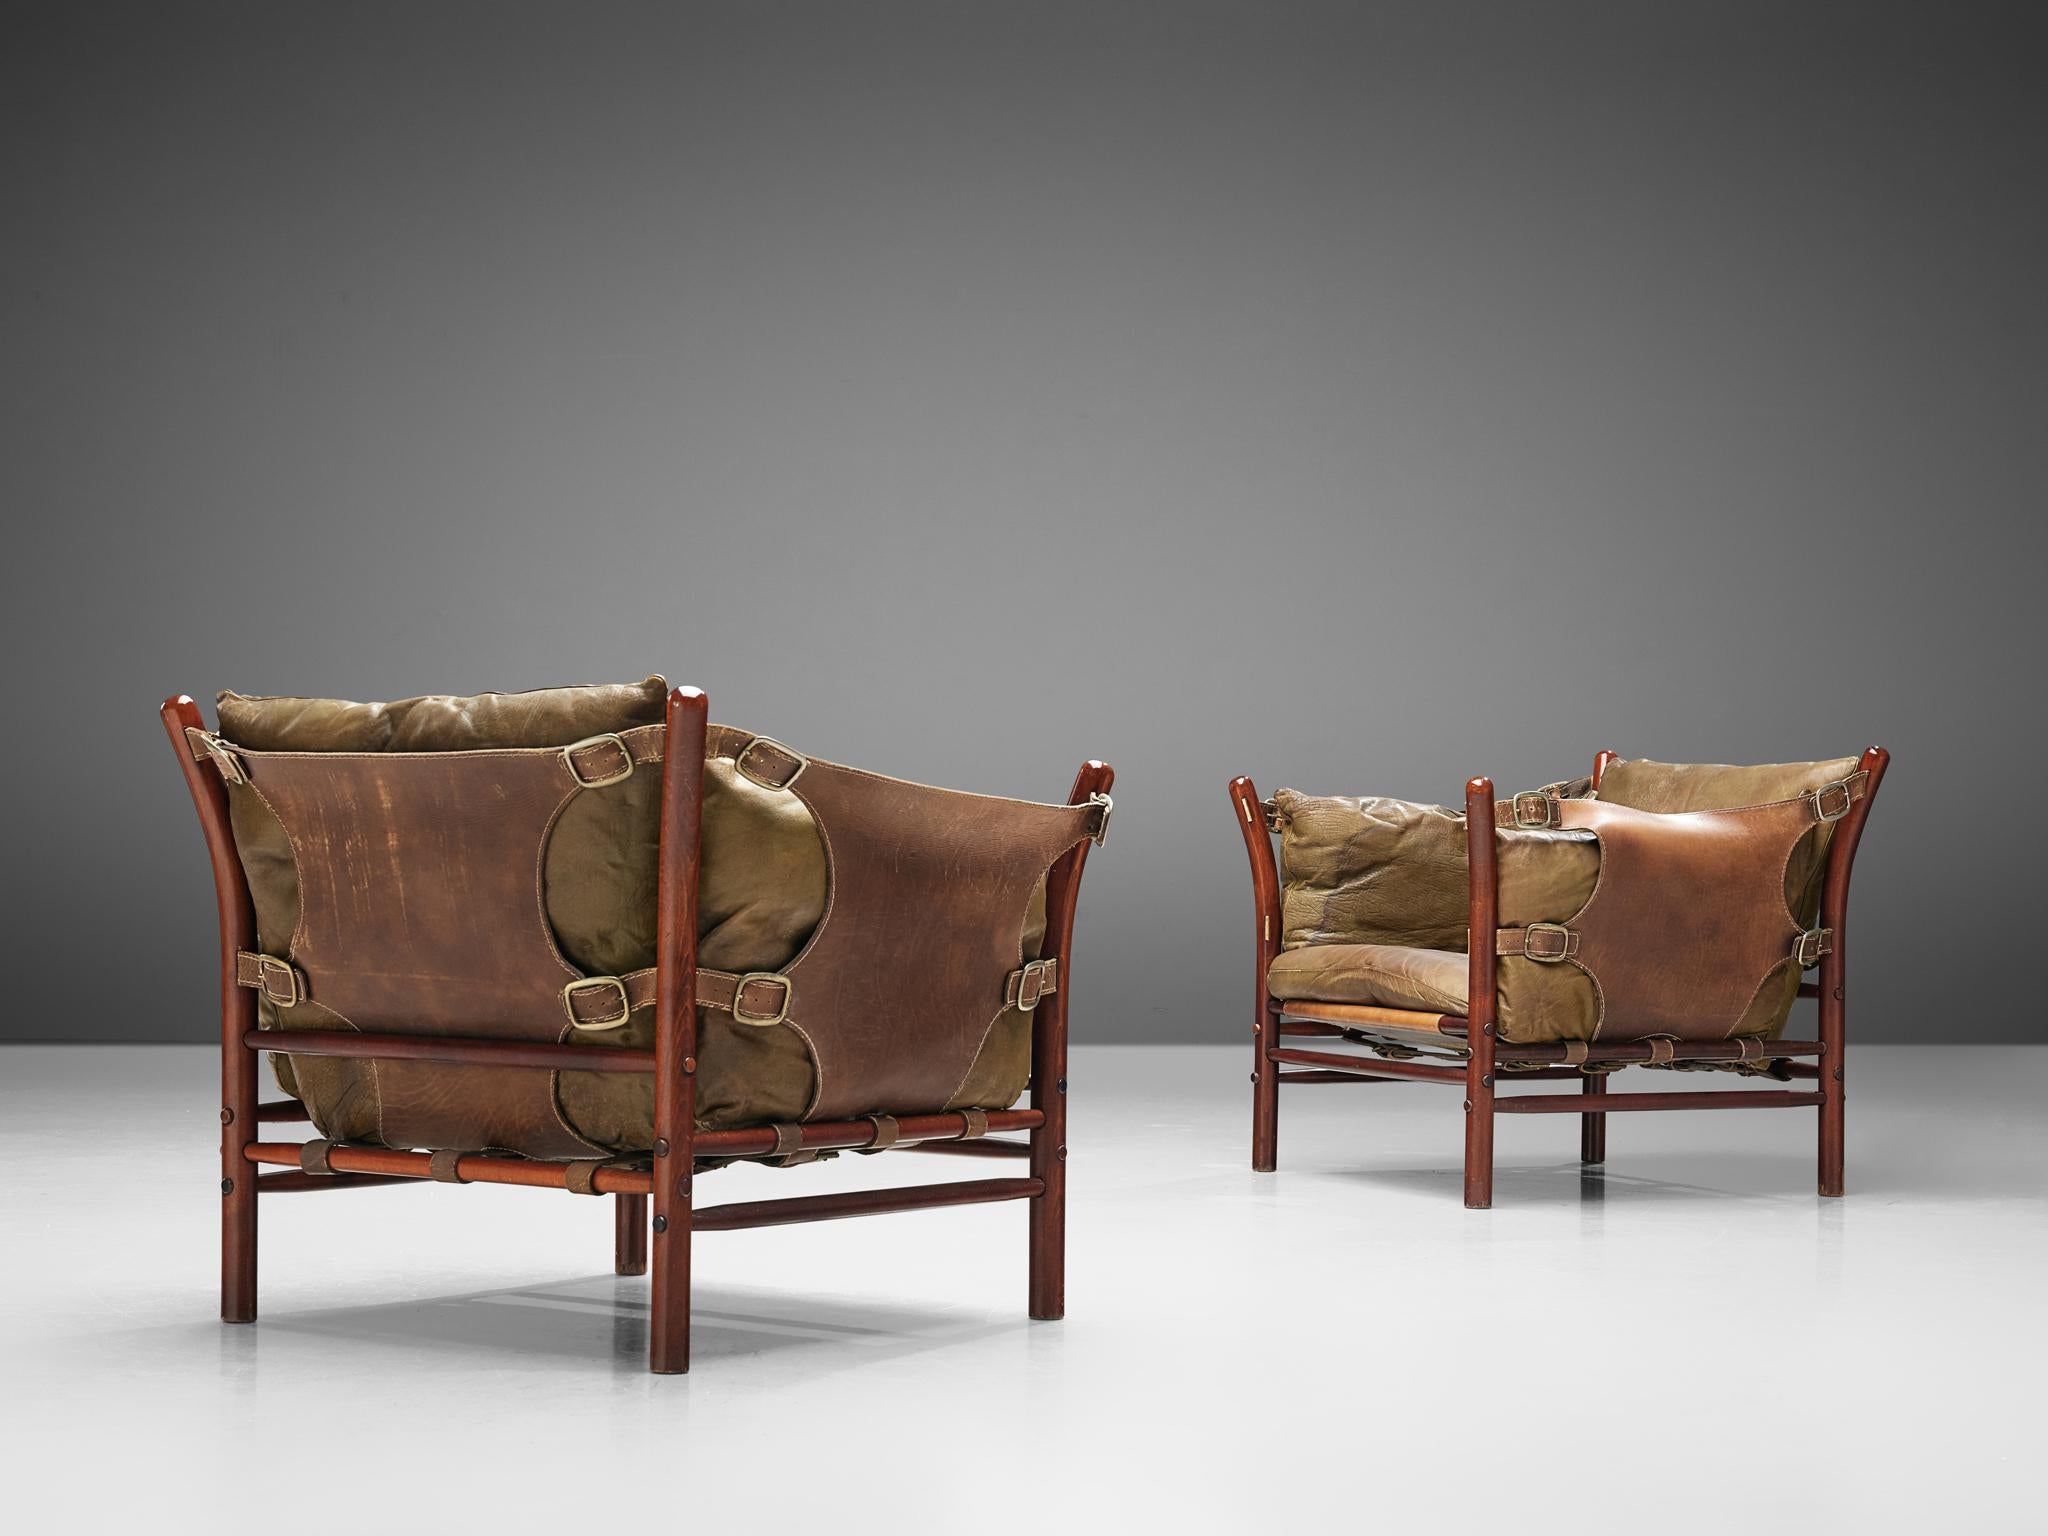 Arne Norell, set of two 'Ilona' lounge chairs, in rosewood and leather, Sweden, 1960s. 

Very nice contrasting pair of easy chairs by Arne Norell. The pair is designed with very thick and rich leather which shows a certain luxury for that time.